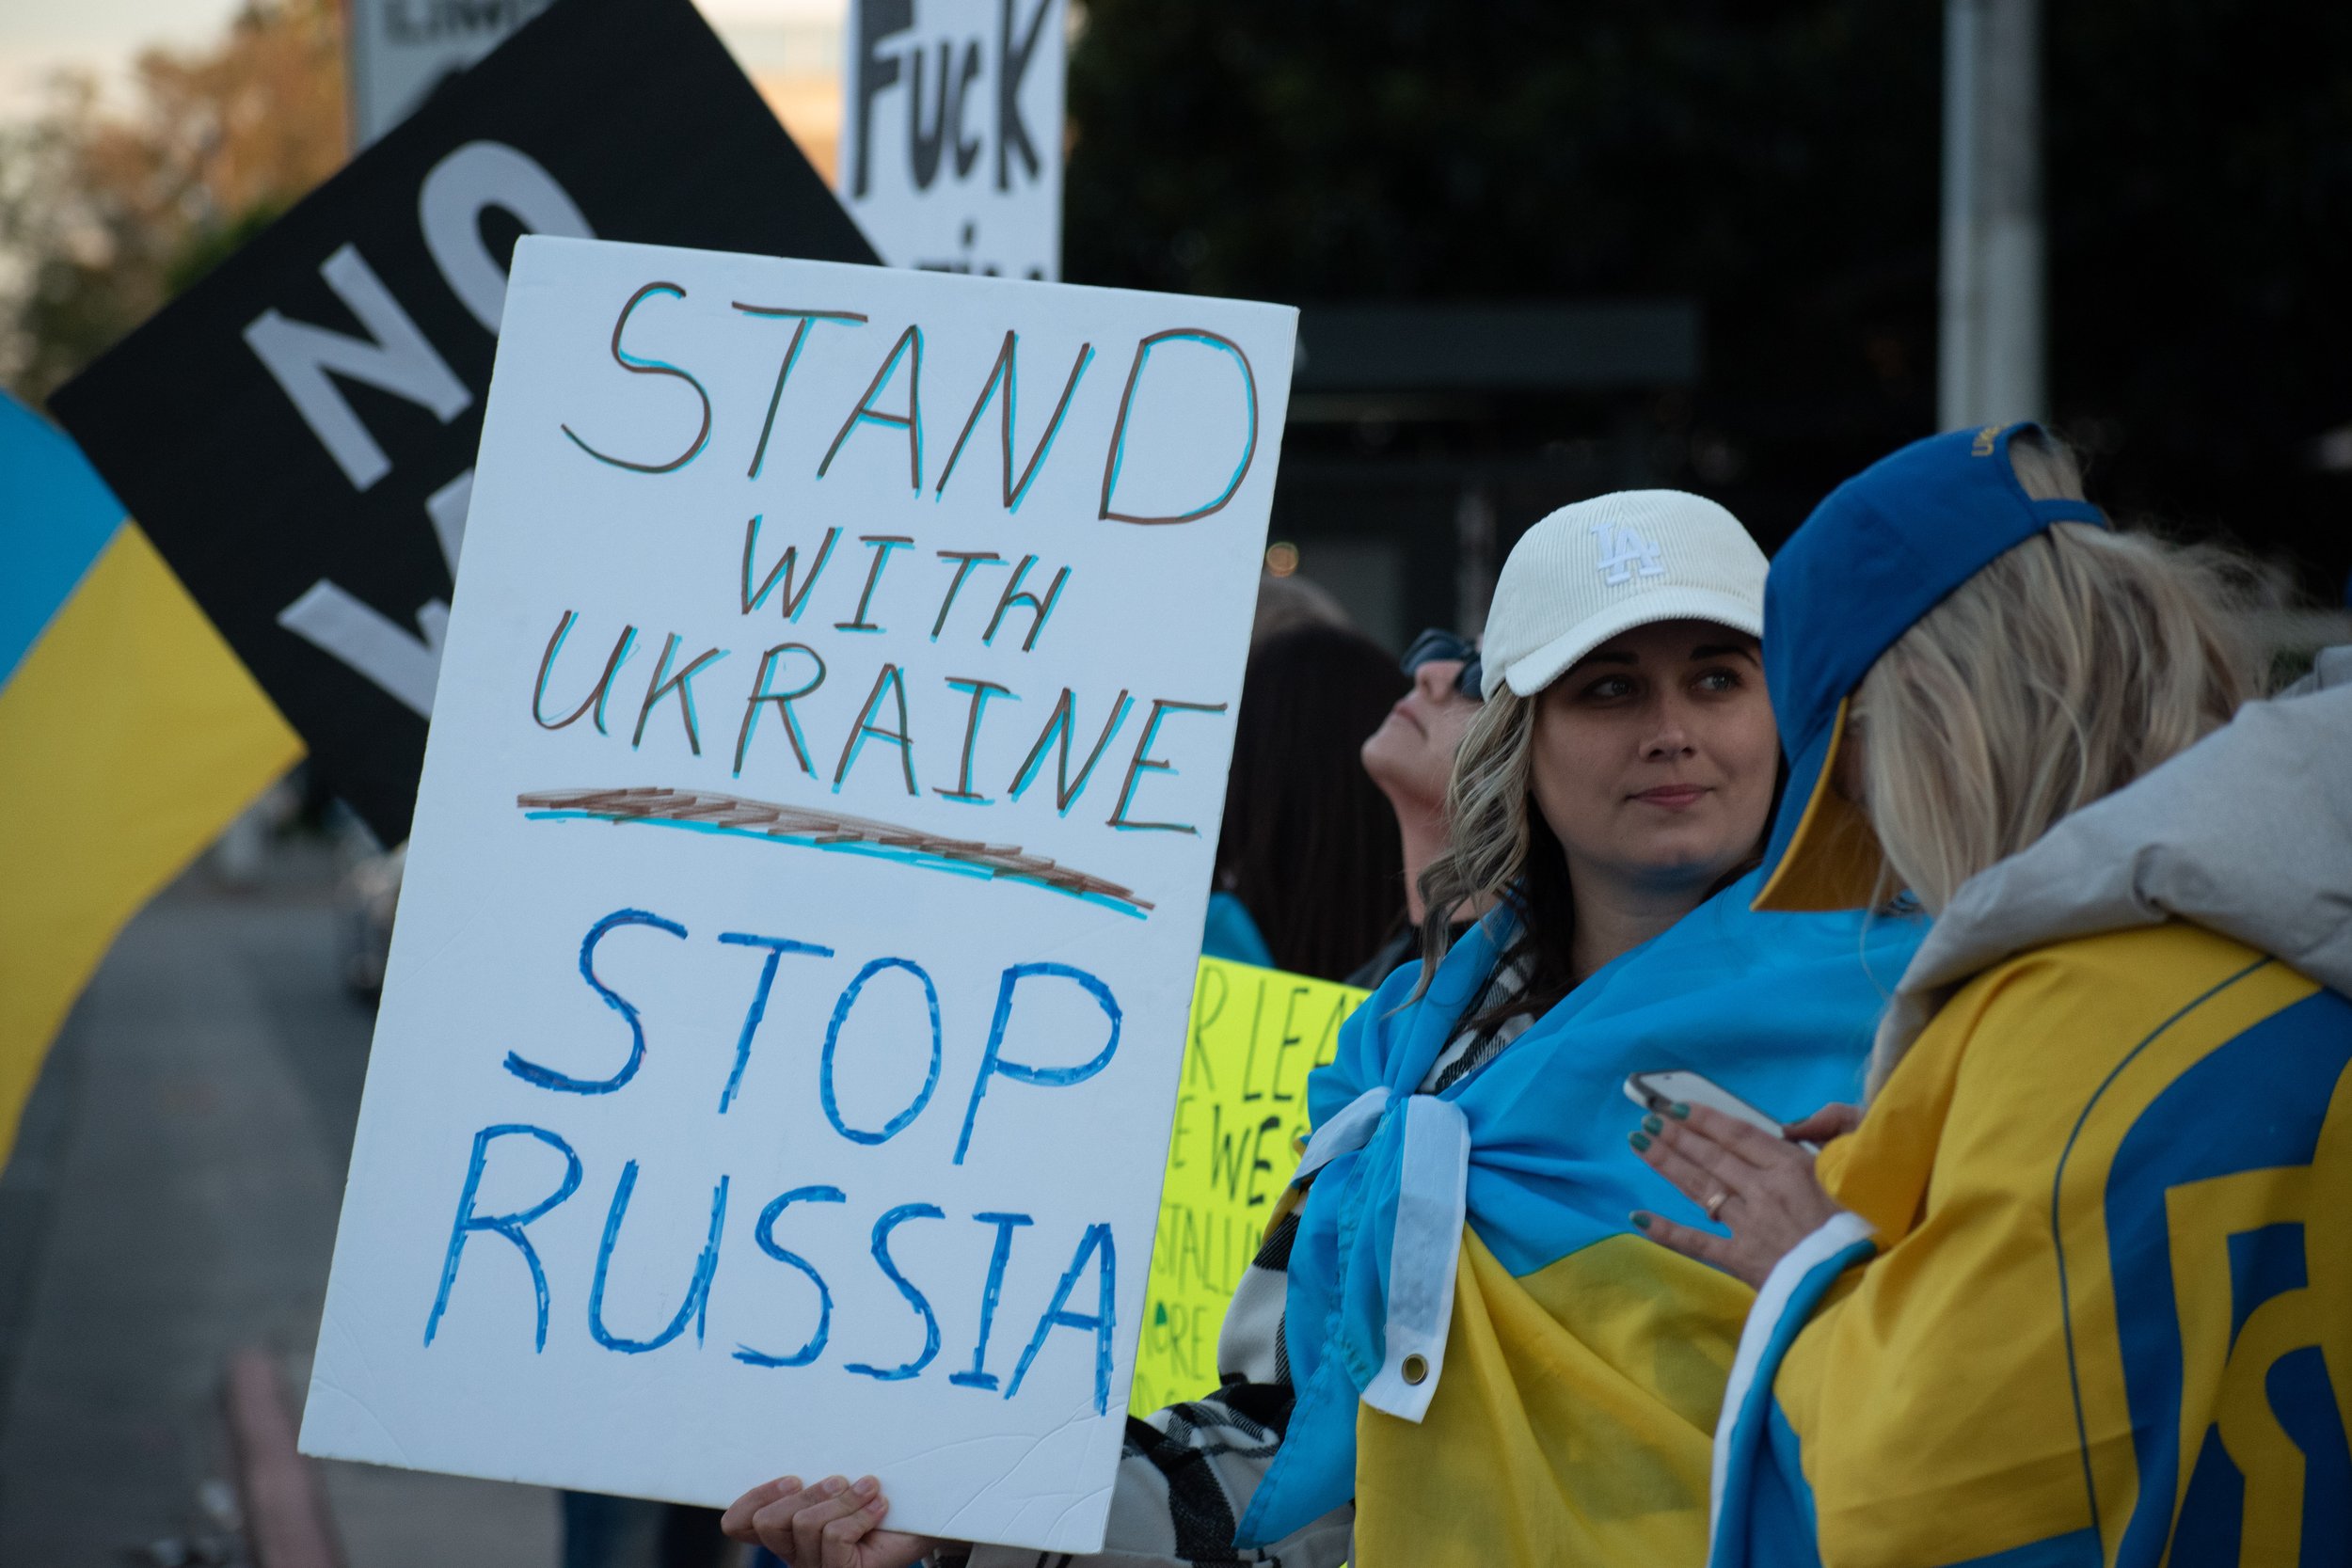  Pro-Ukrainian protestors hold signs into the street in support at 11111 Santa Monica Blvd in Santa Monica, Calif. on February 26, 2022. Even across the globe, anti-Russian invasion sentiment is tangibly felt, especially in Los Angeles ( Marc Federic